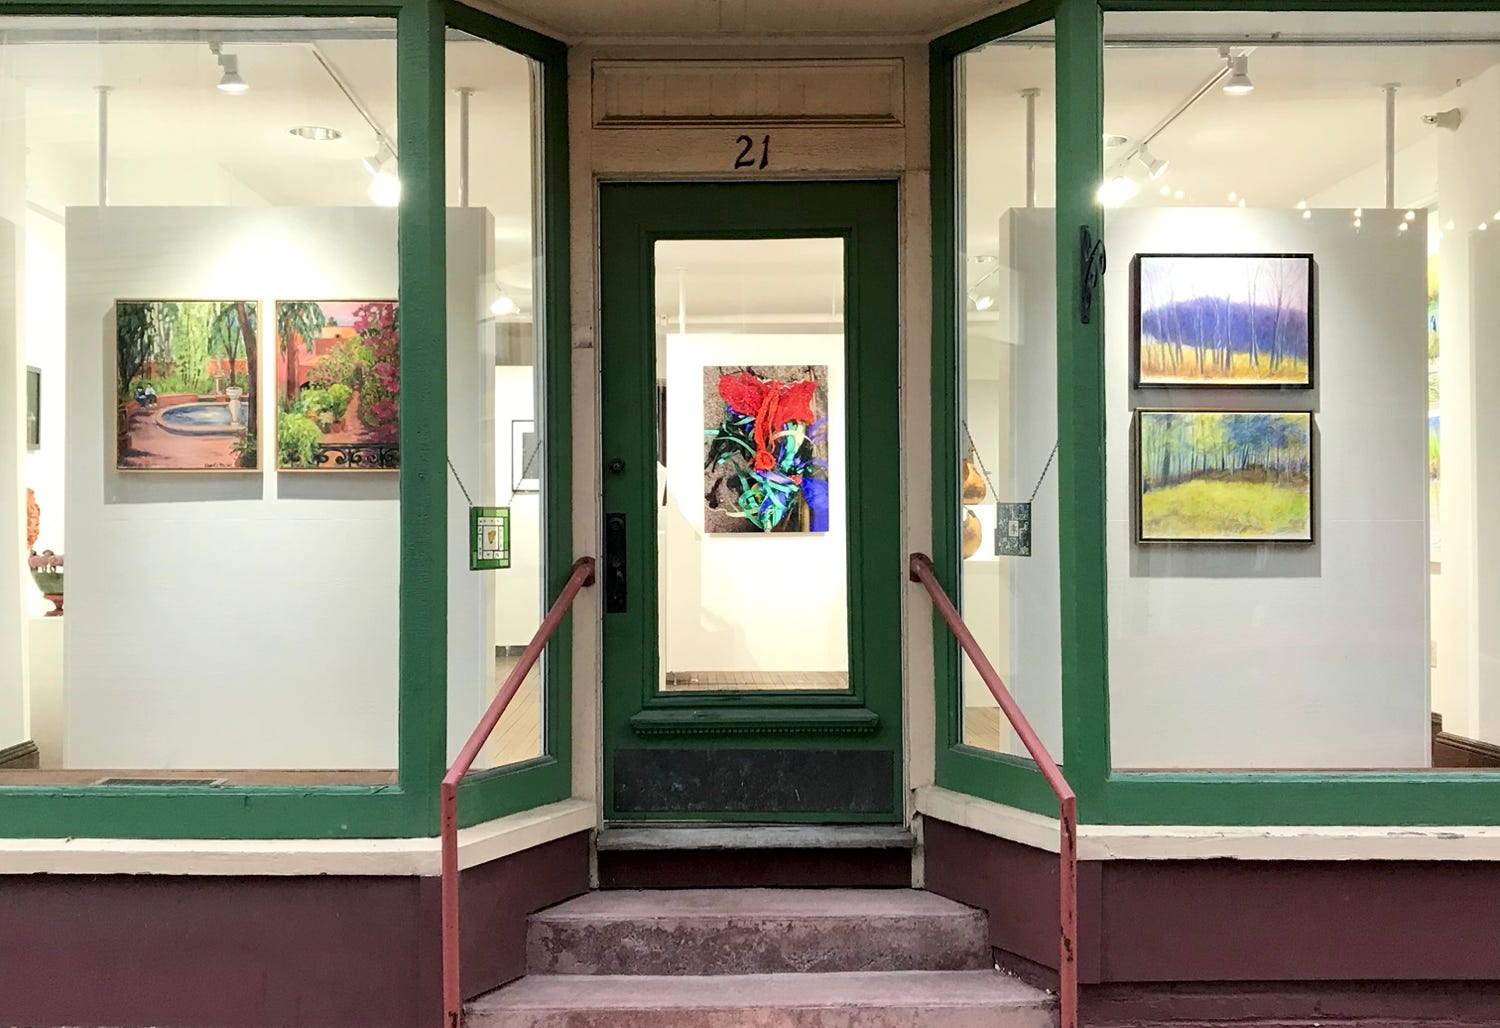 4th Annual VERMONT SUMMER GROUP SHOW